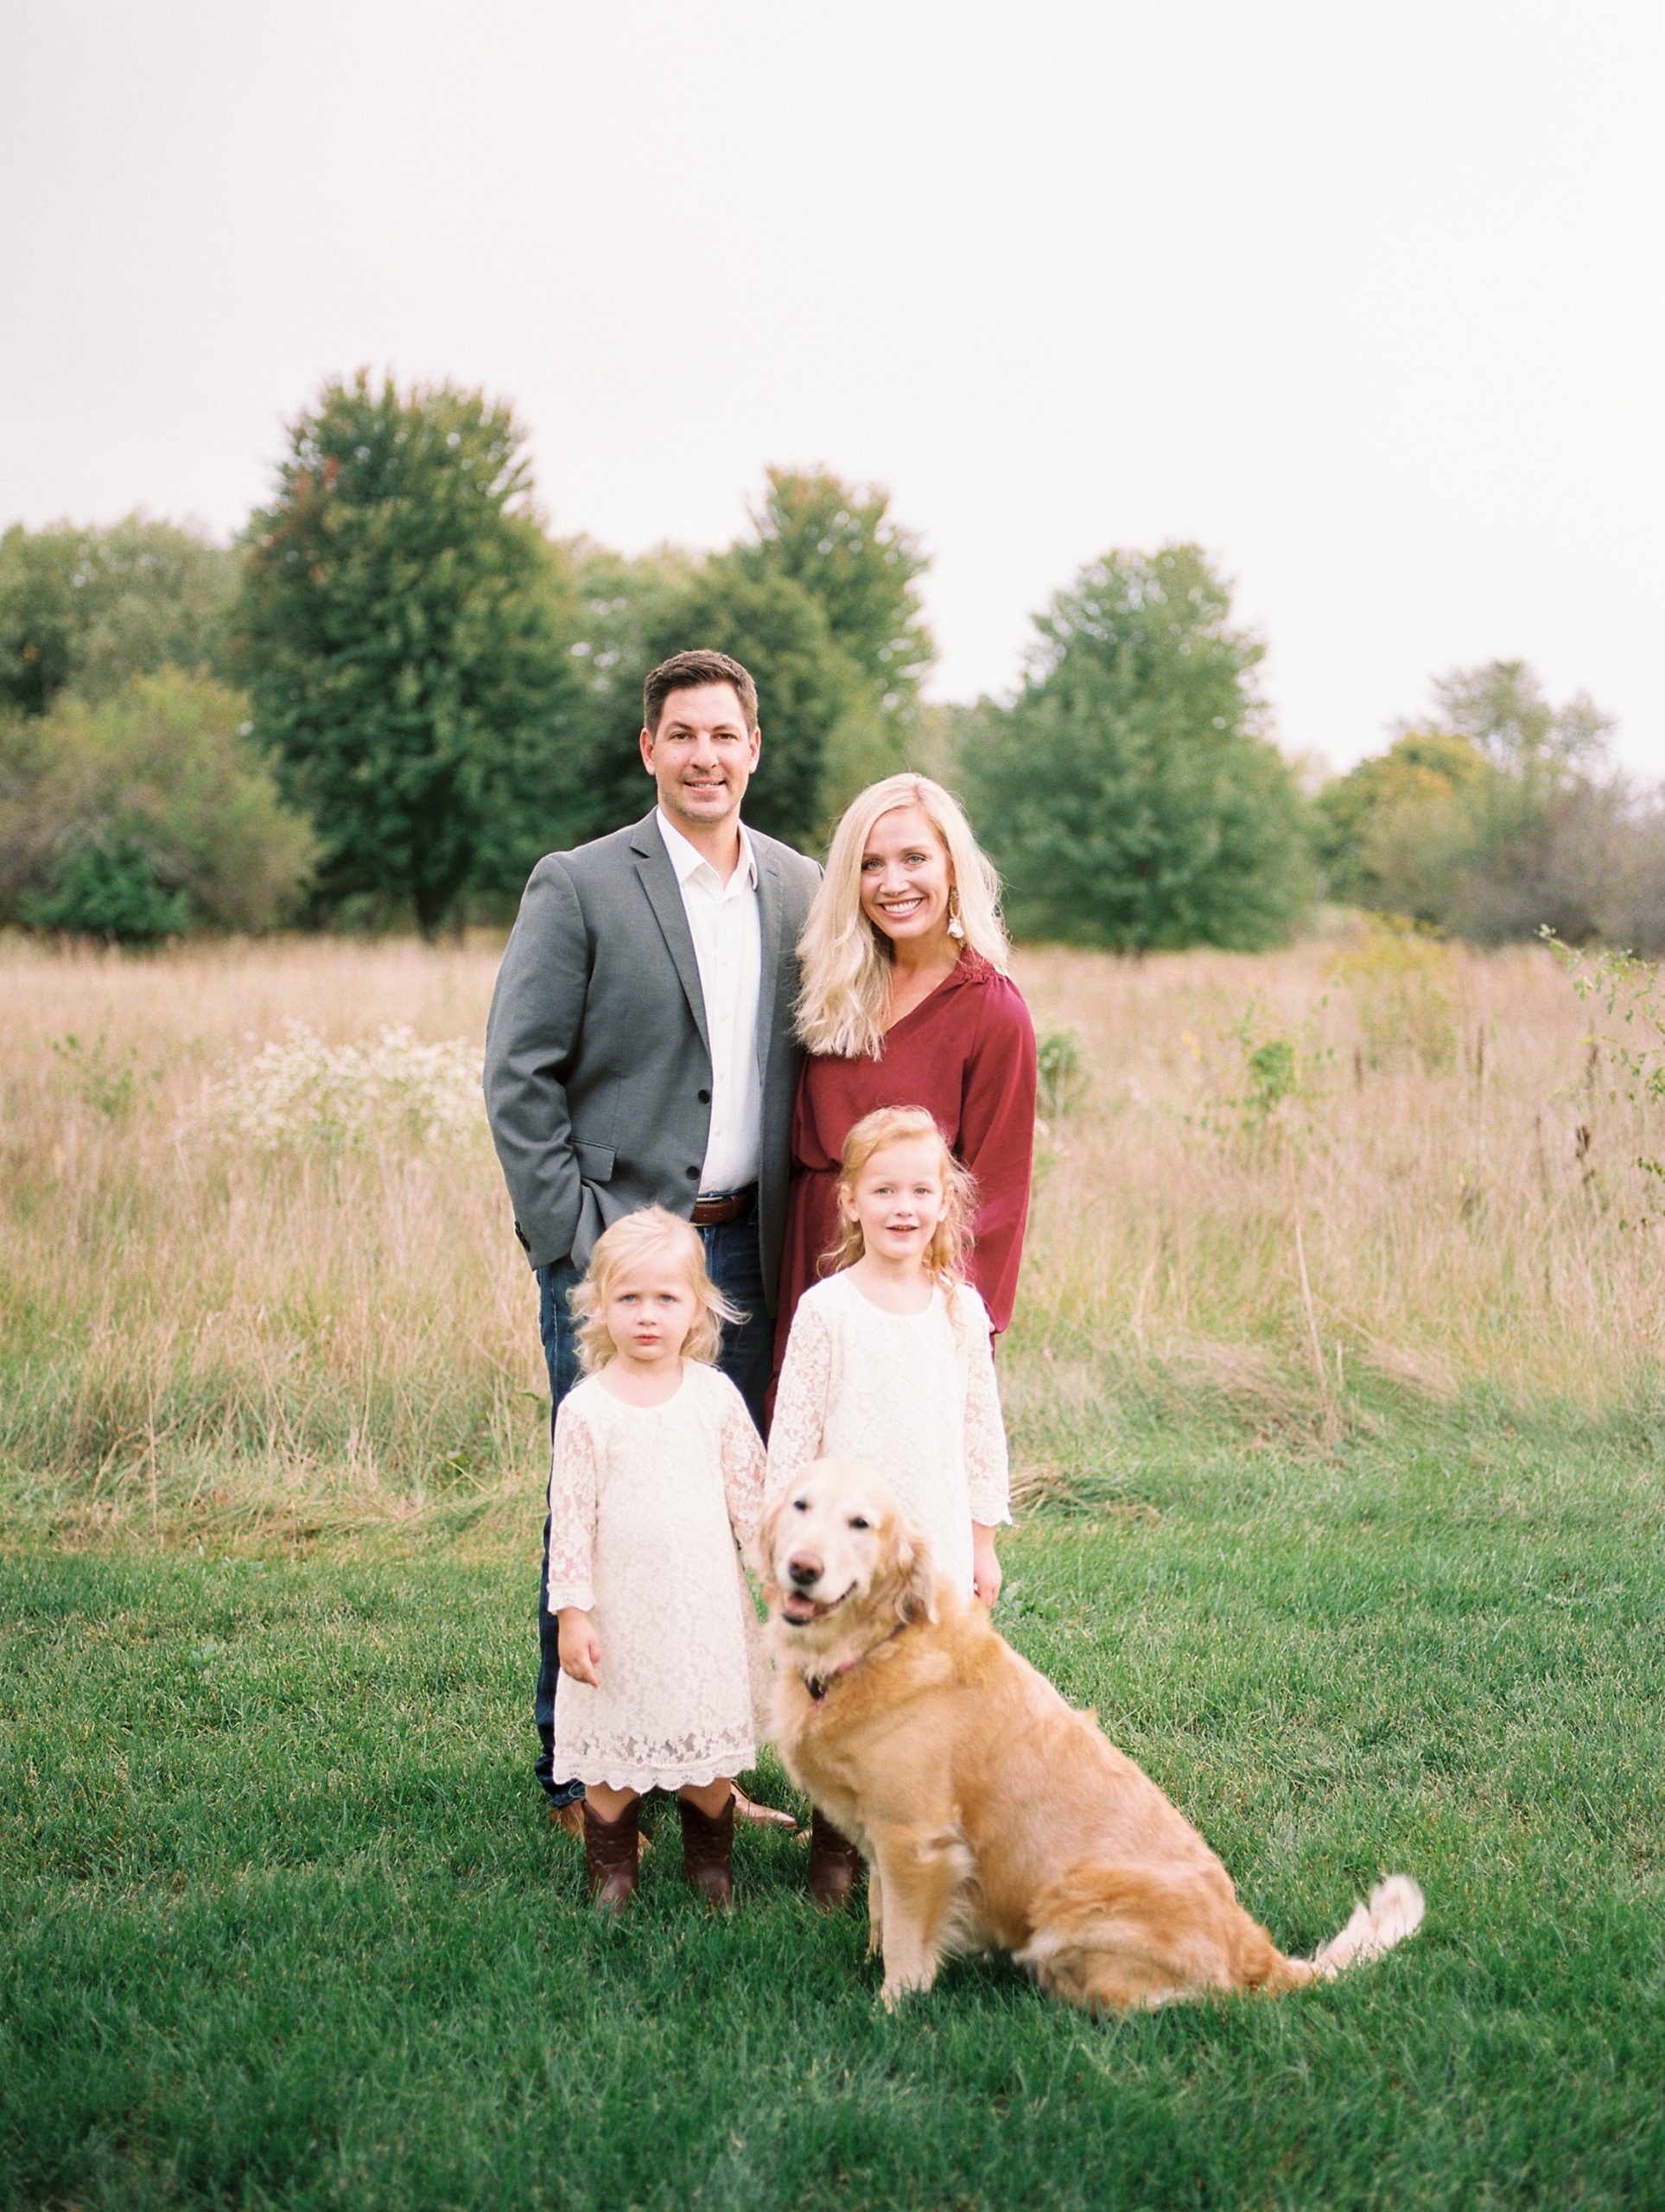 Including your dog in your professional family photos